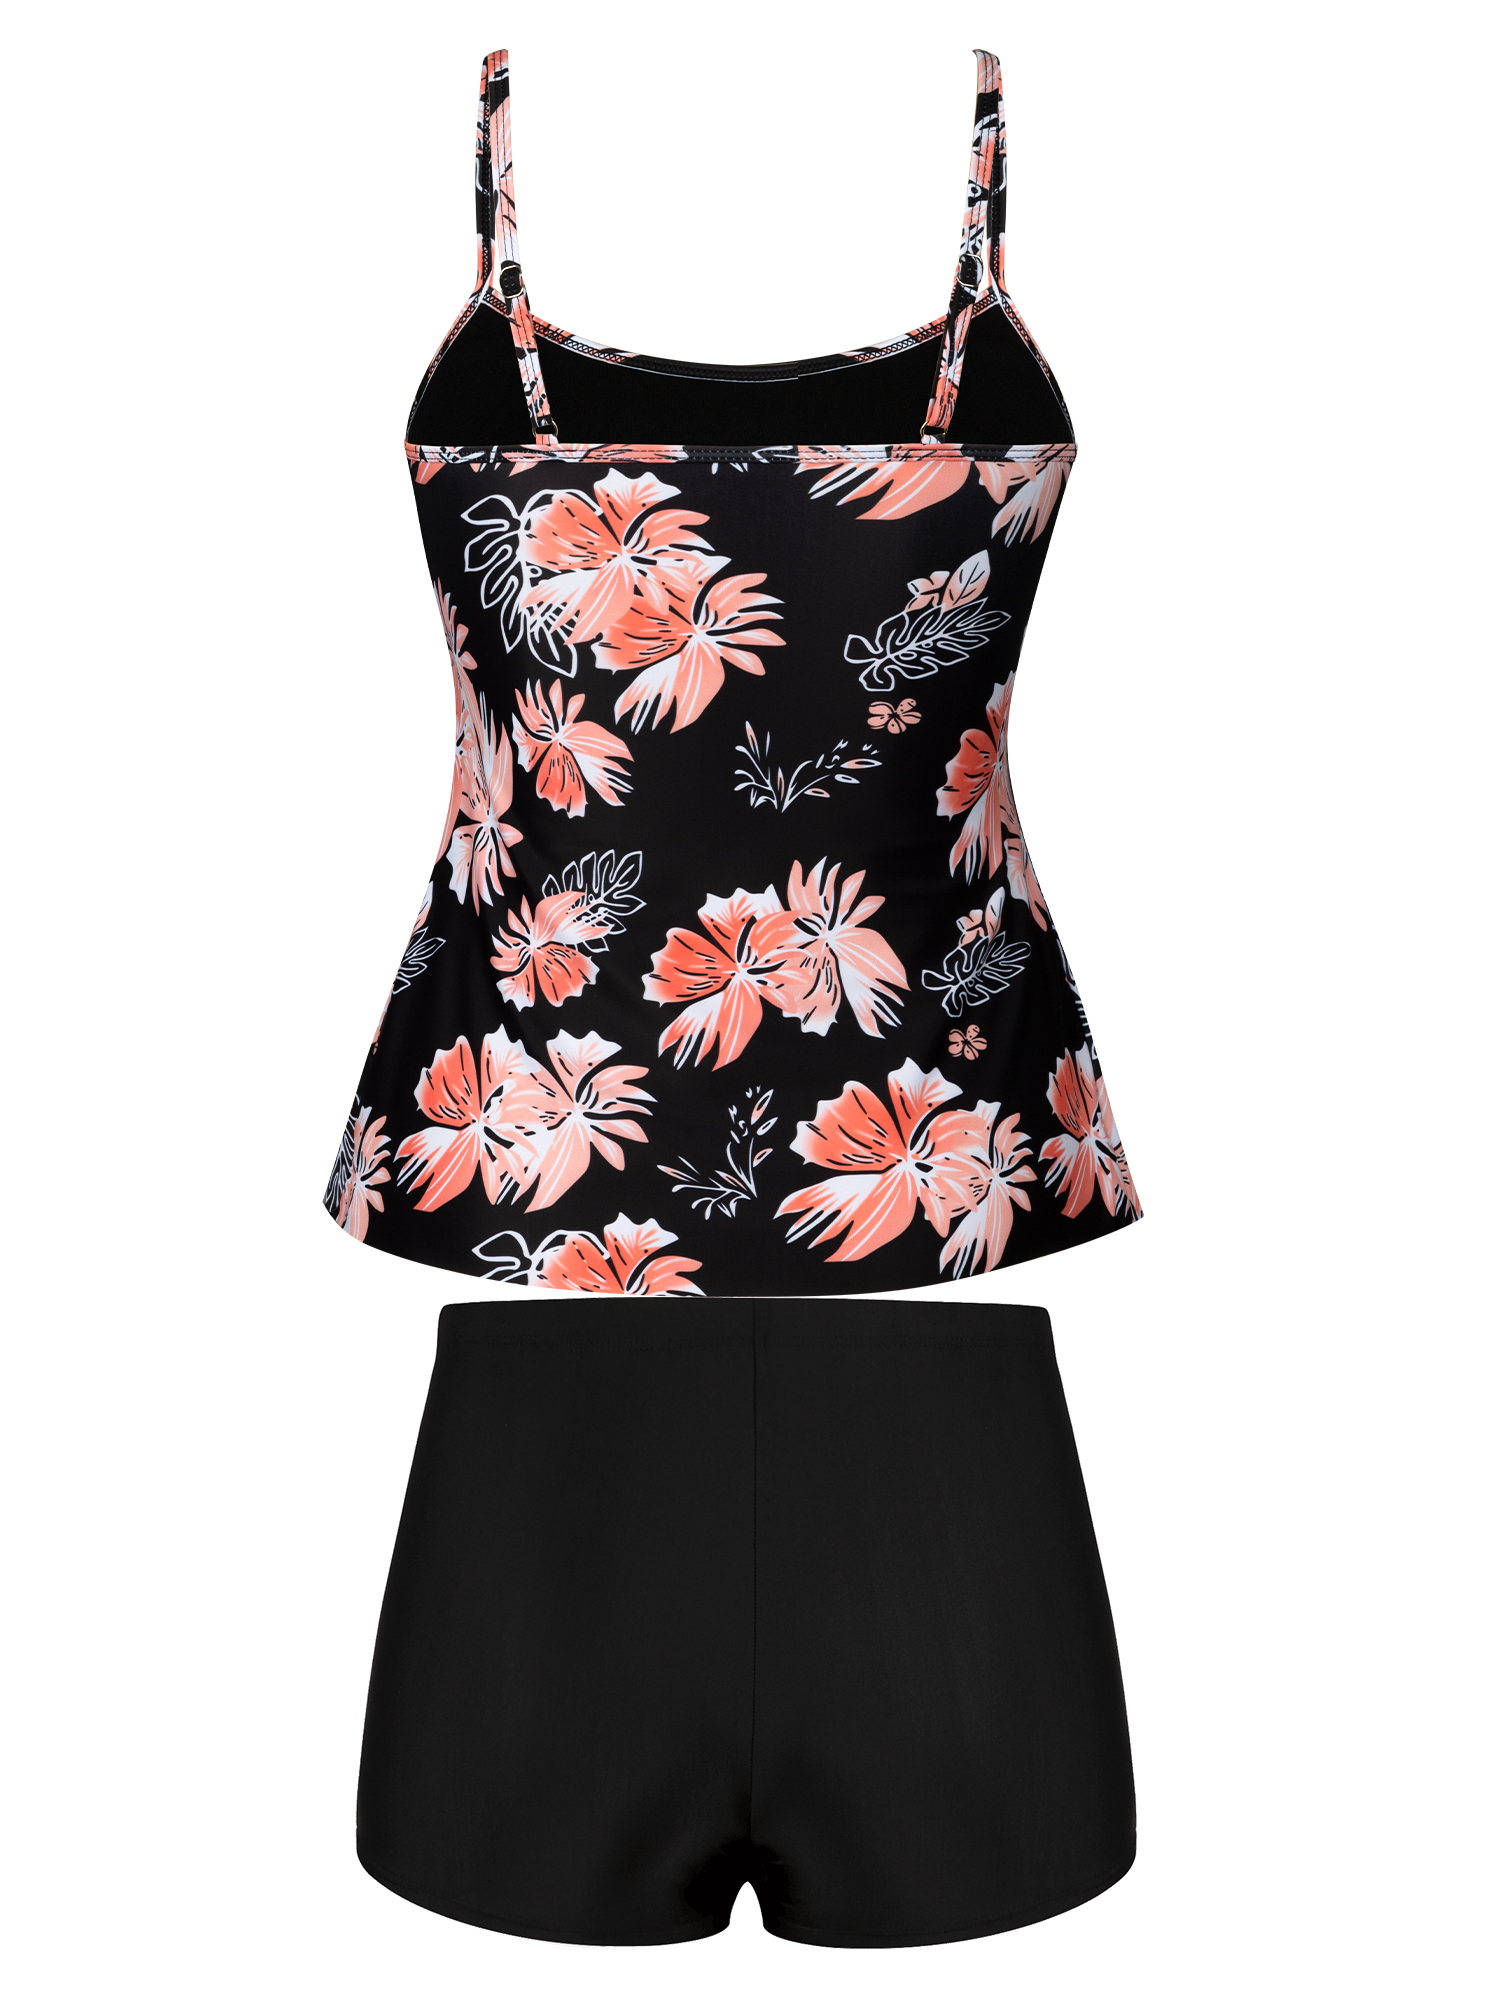 Plus Size Bathing Suit For Women Floral Printed Two Piece Swimsuit Layered Ruffle Tankini Top 